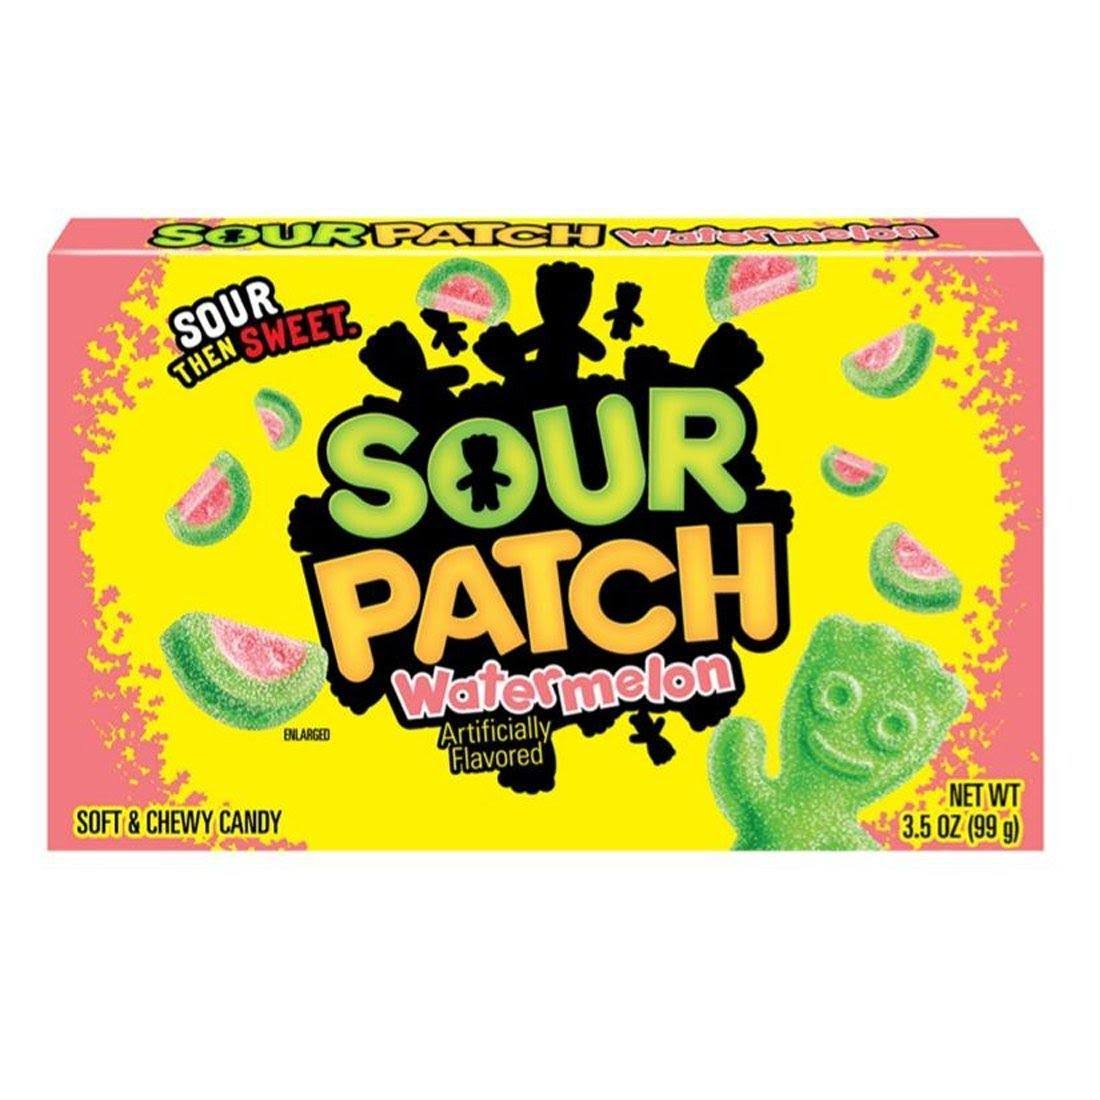 Sour Patch Watermelon Soft & Chewy Candy - 3.5oz